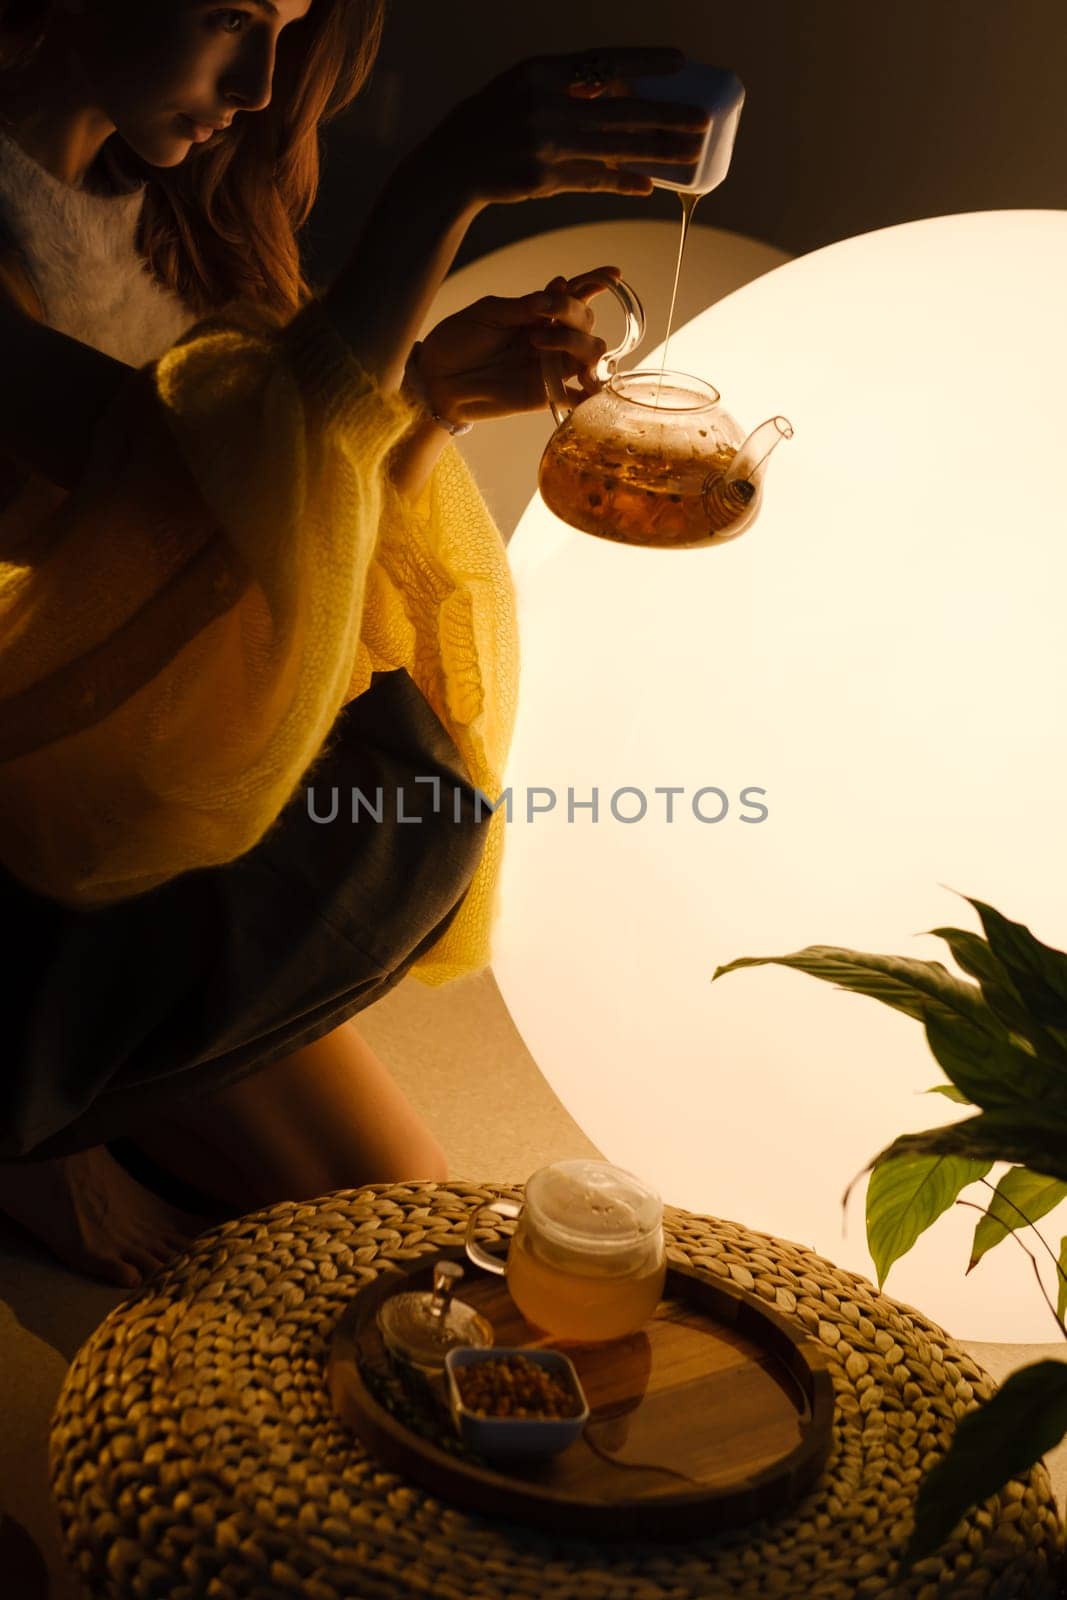 A young girl conducts an evening tea drinking procedure indoors. Relaxing tea party by Lobachad